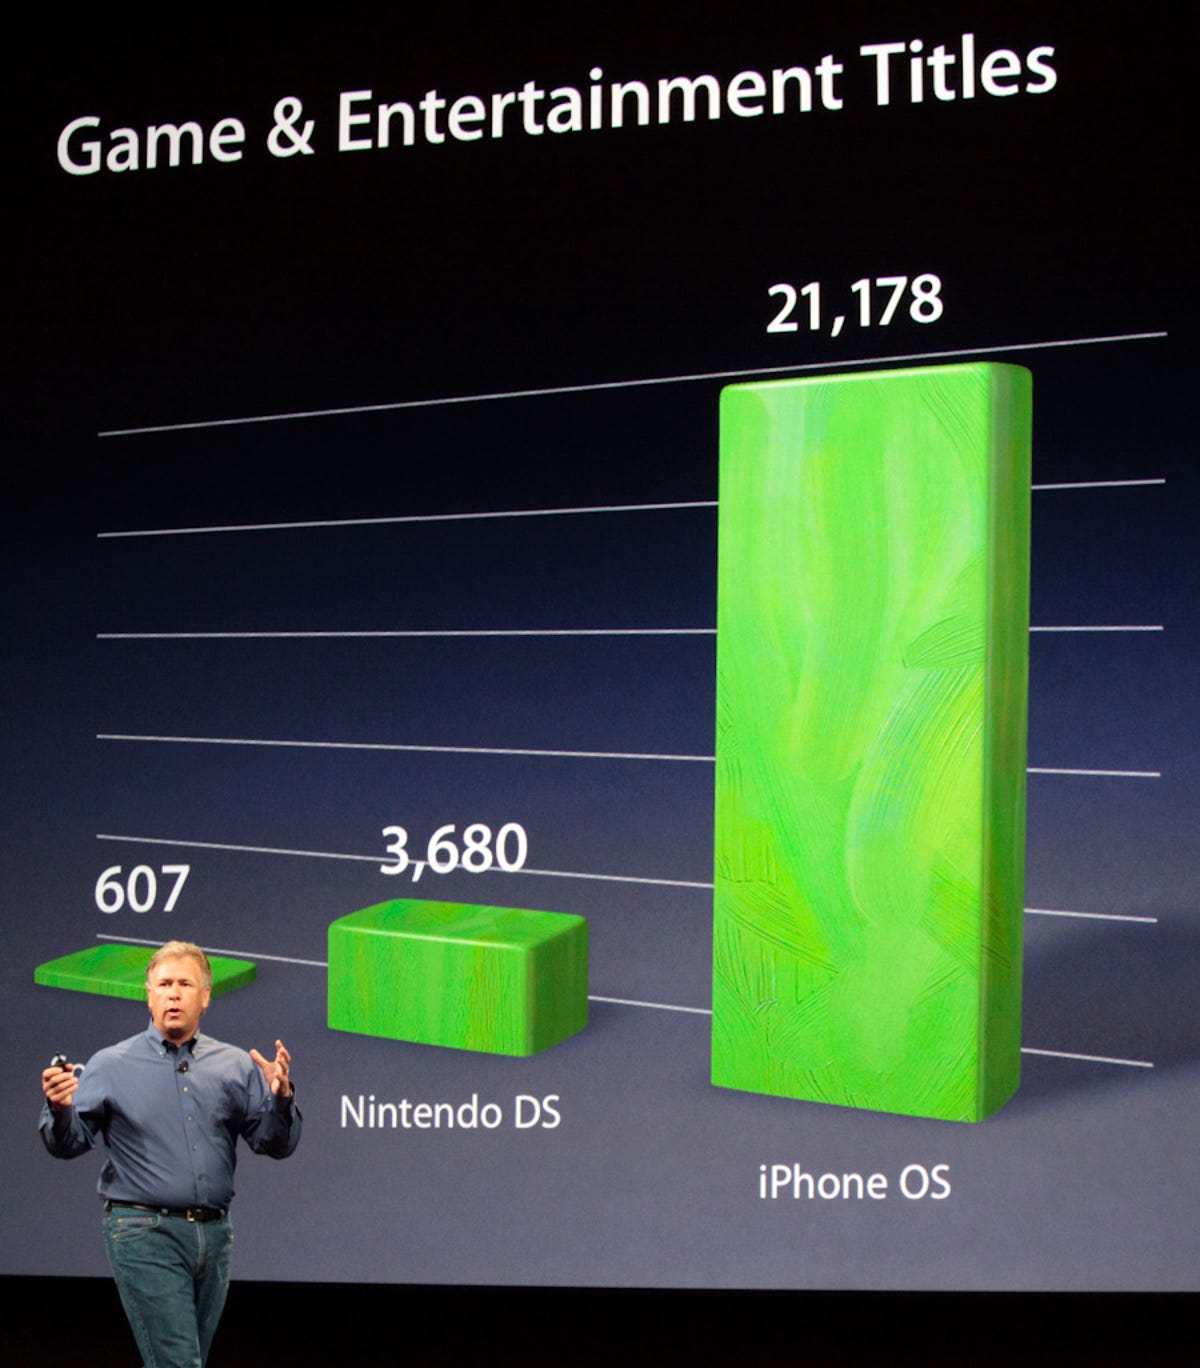 Phil Schiller brags about iPhone as gaming platform.